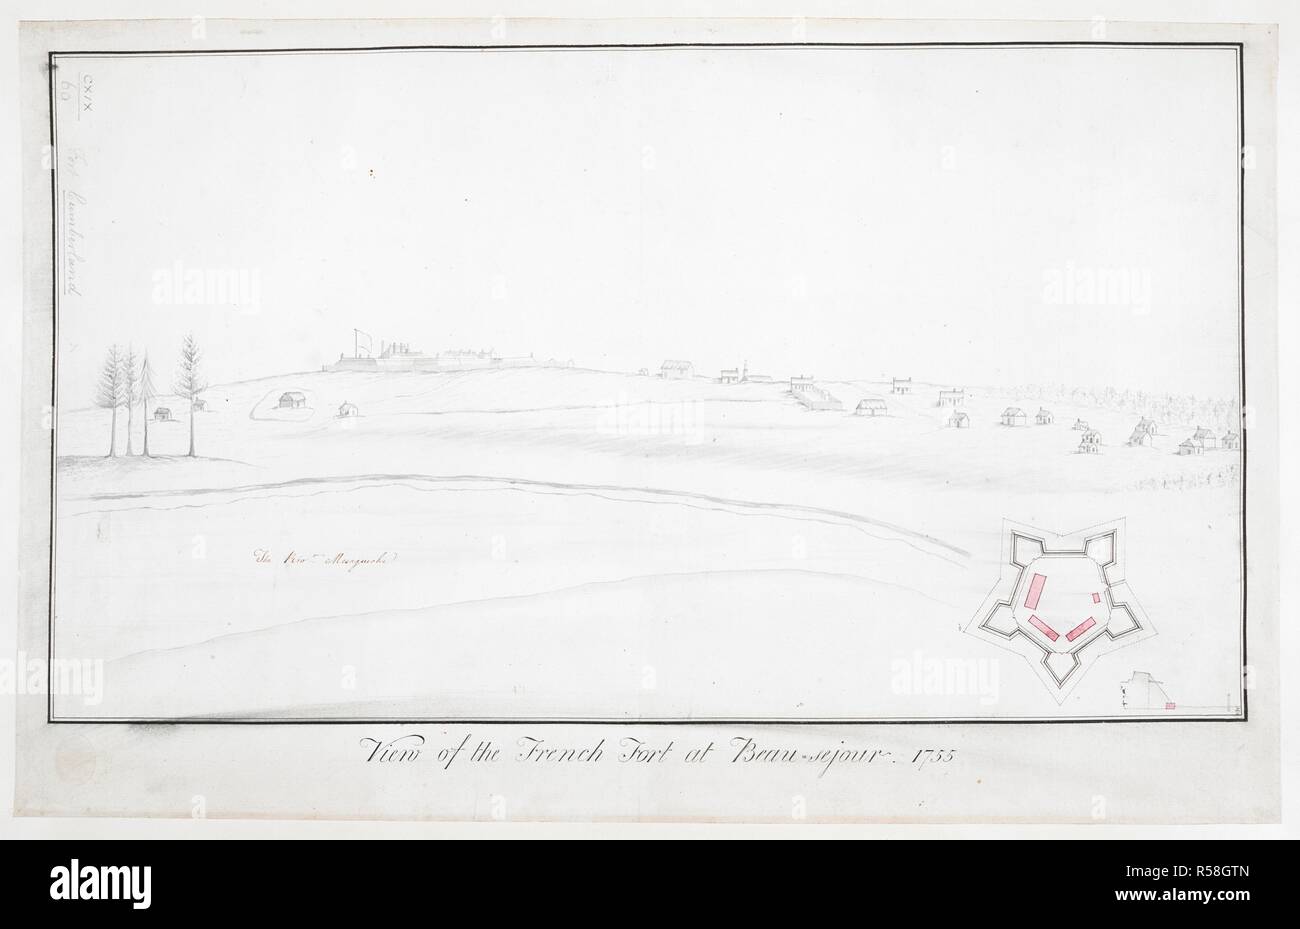 A view of Fort BeausÃ©jour from the Missaguash River; buildings to the right; trees on the left; a plan of the fort in the lower right-hand corner. View of the French Fort at Beau=sejour. 1755. Source: Maps K.Top.119.69. Language: English. Stock Photo